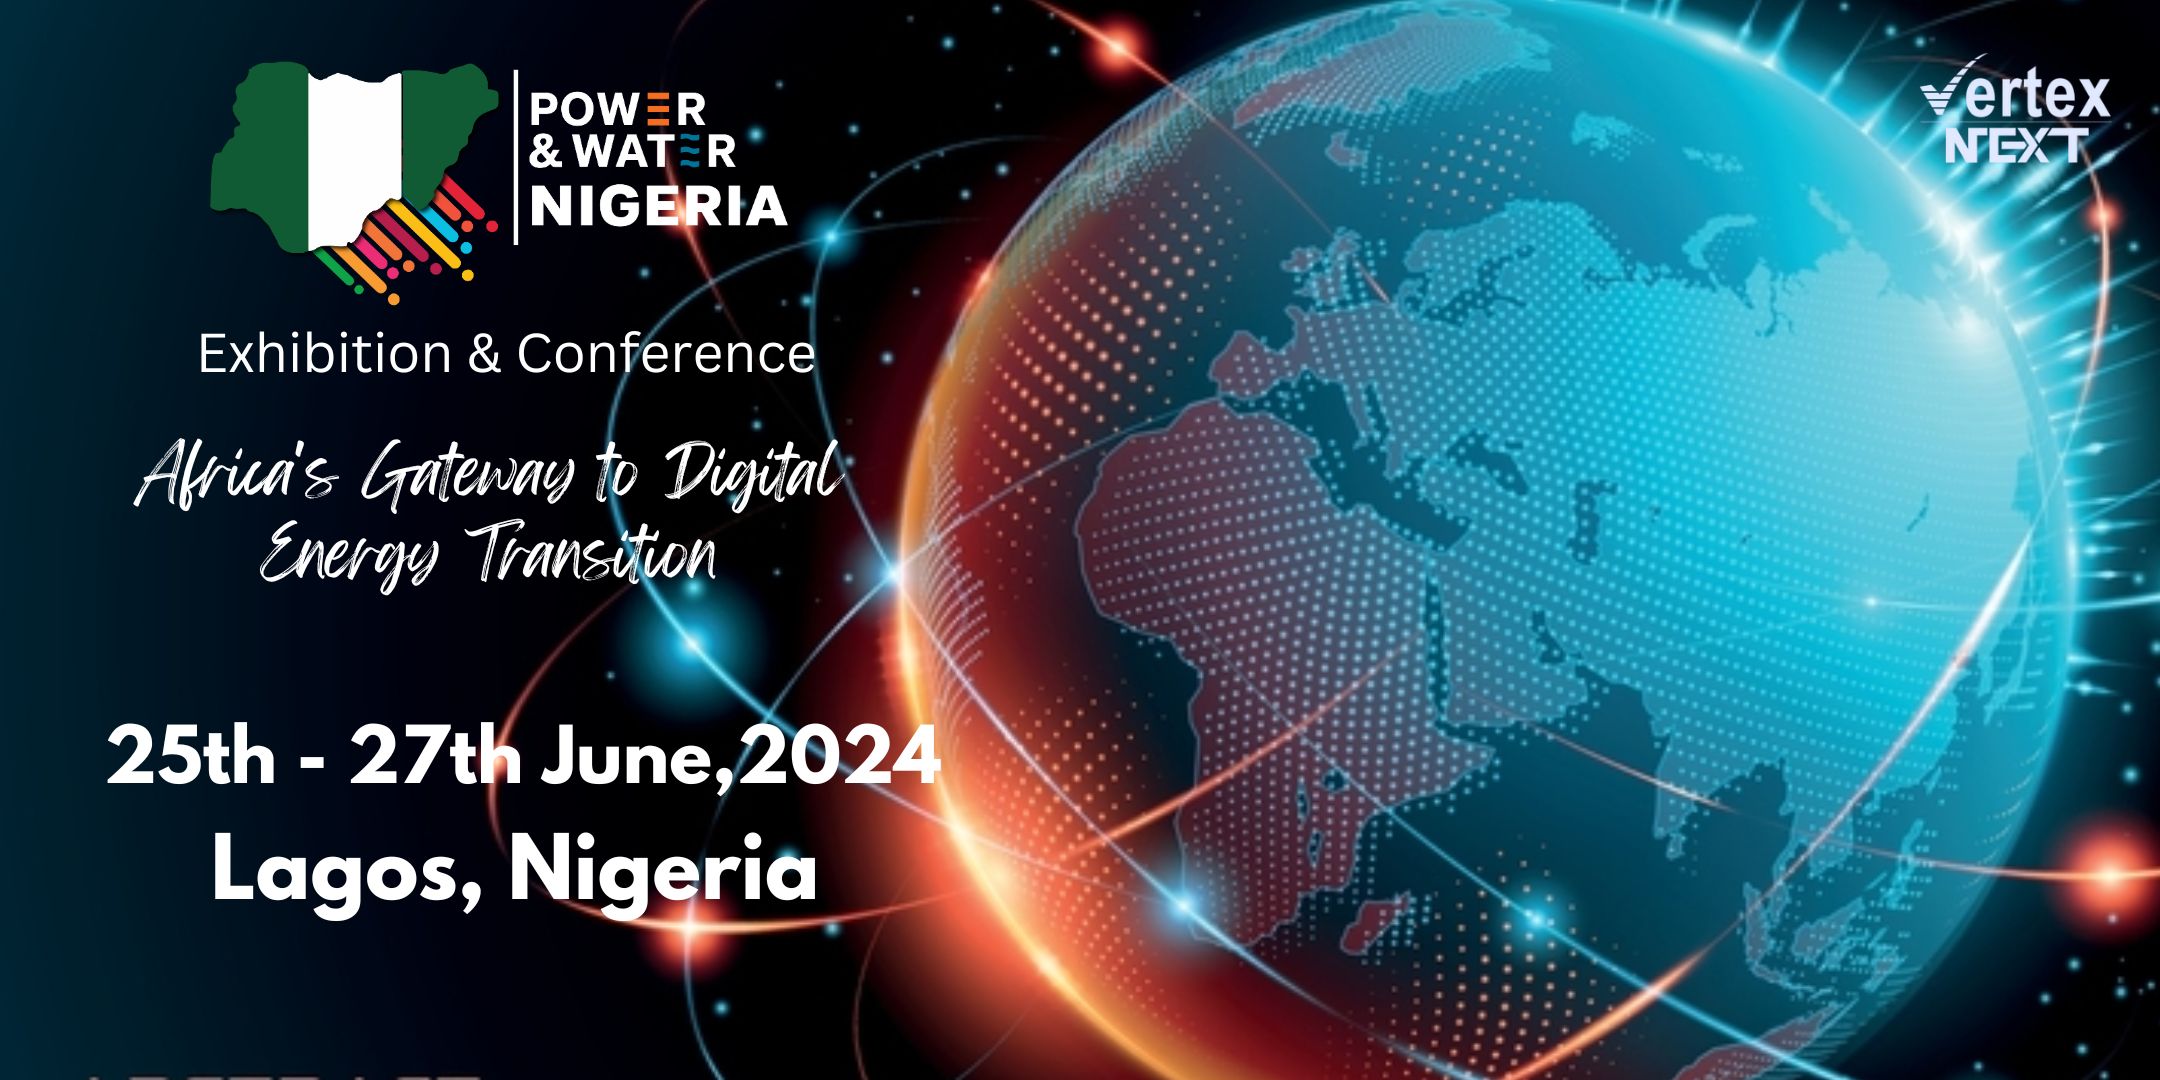 Power & Water Nigeria Exhibition & Conference Post free event in Nigeria using tickethub.ng, buy and sell tickets to event